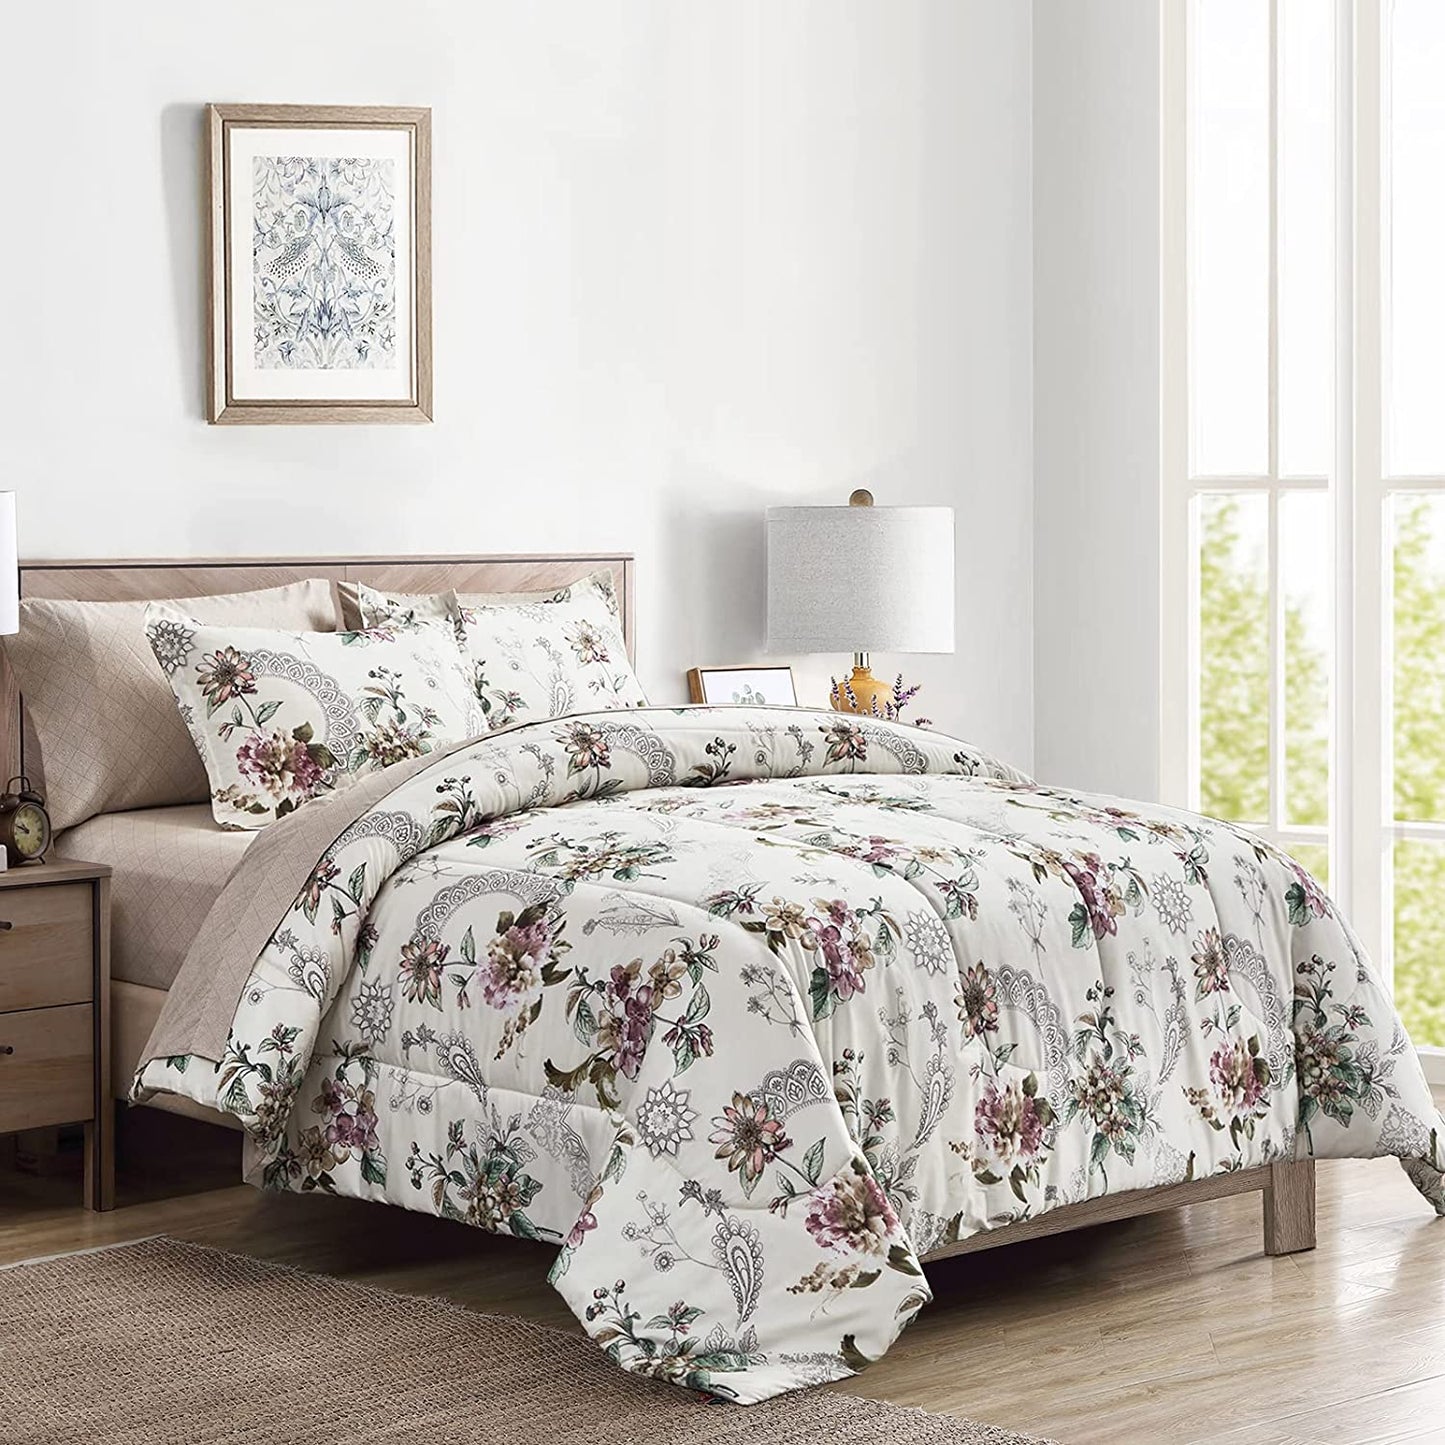 Red Floral Botanical Design 7 Pieces Reversible Comforter Set With 4 Pillows